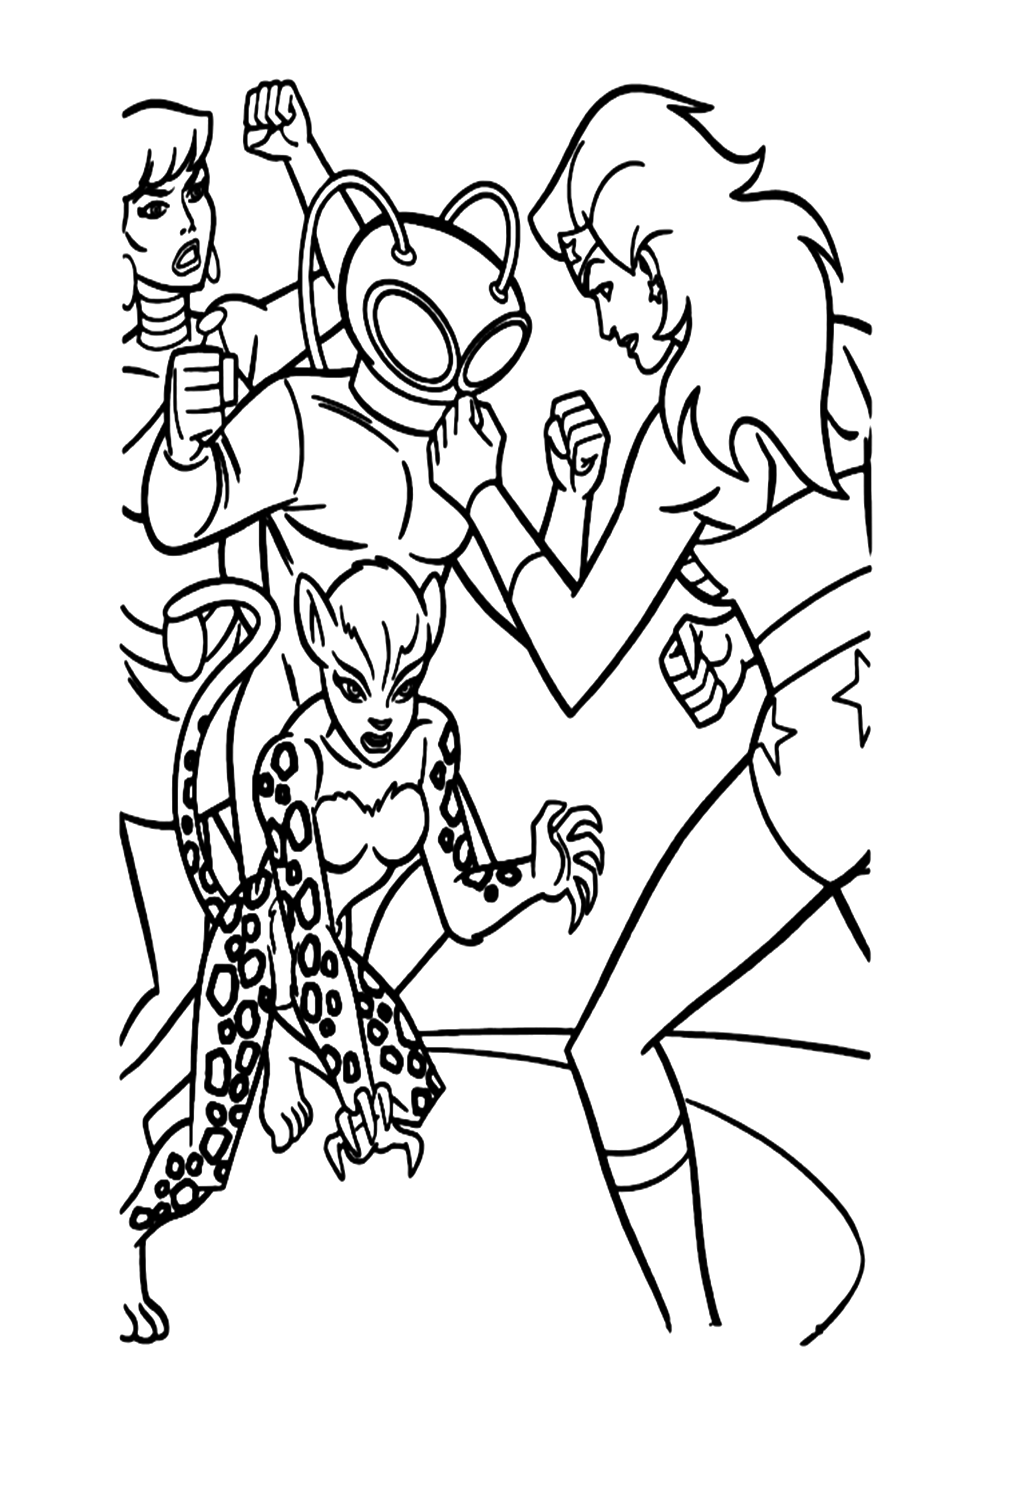 Wonder Woman And Her Nemesis Coloring Page